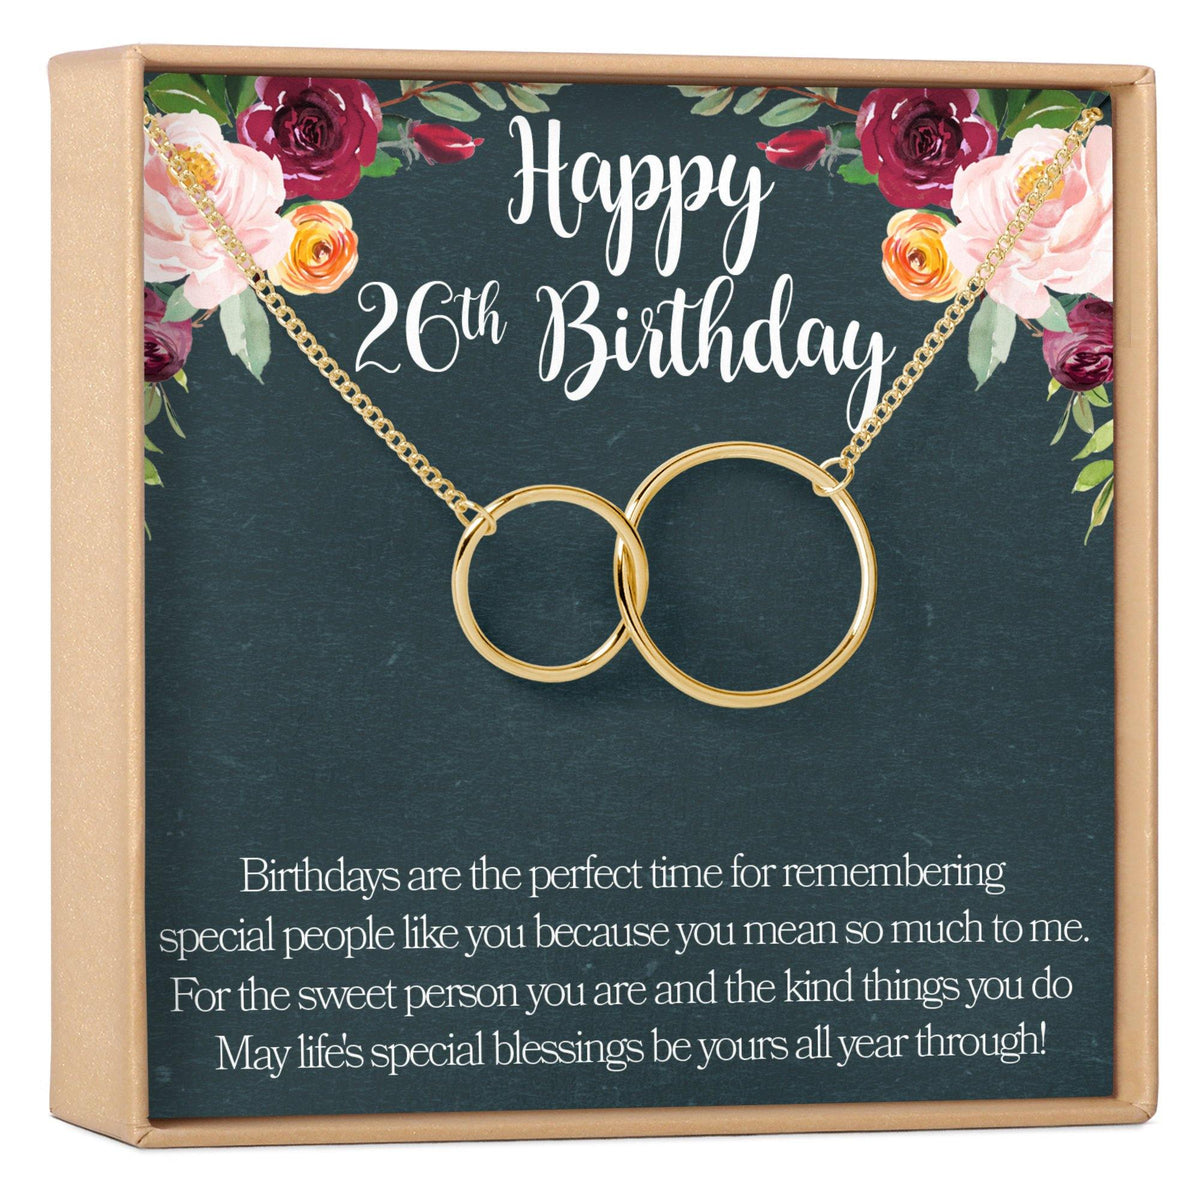 26th Birthday Necklace - Dear Ava, Jewelry / Necklaces / Pendants